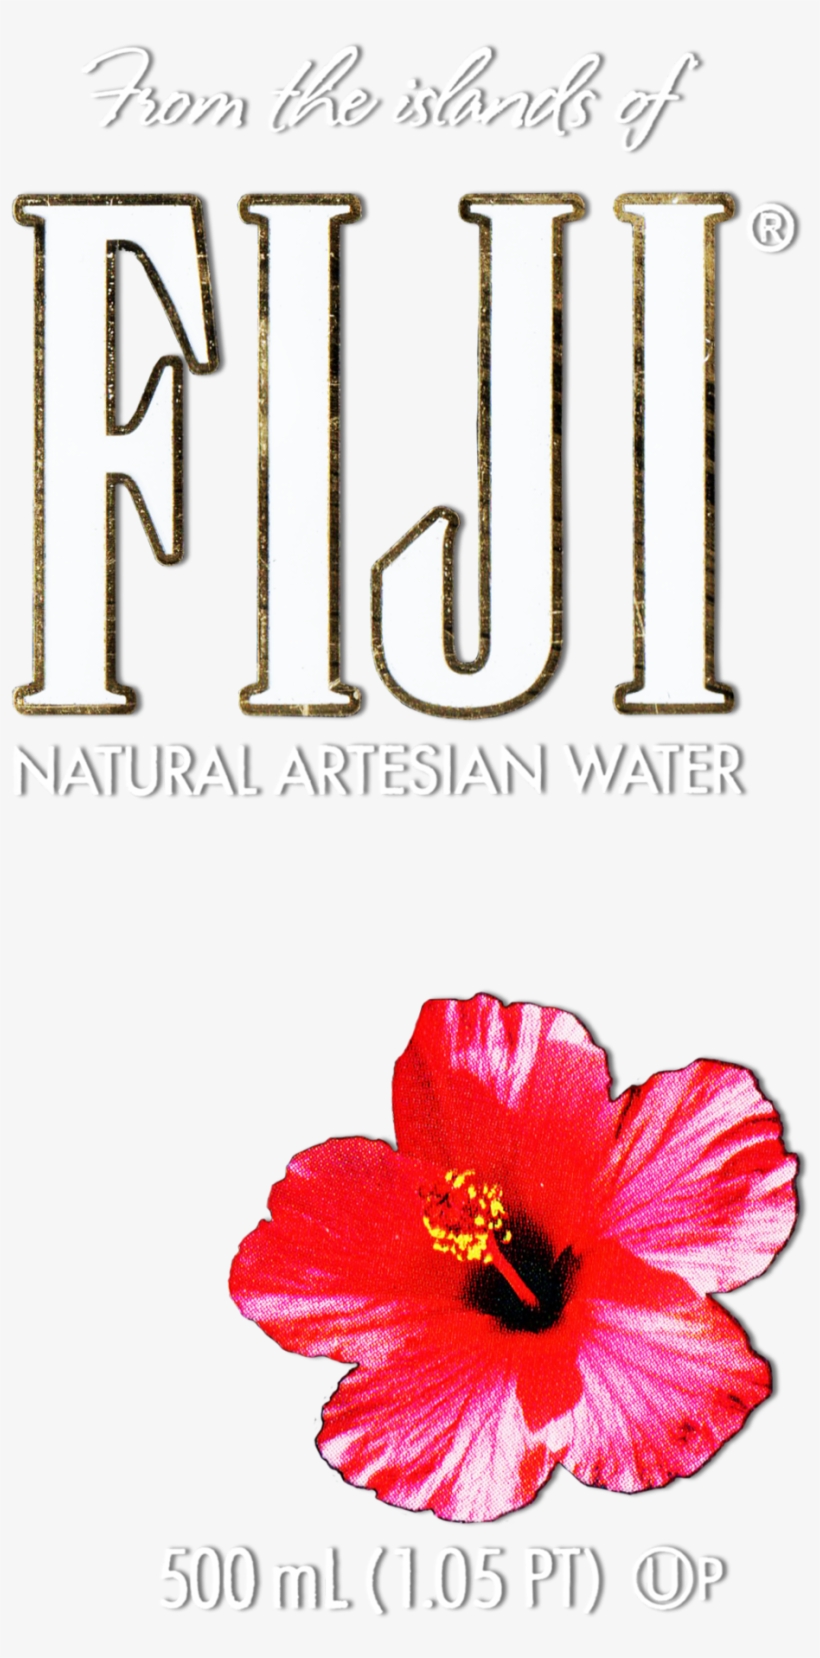 Hibiscus Flower Png Image Collections - Fiji Water Bottle Flower, transparent png #1170665